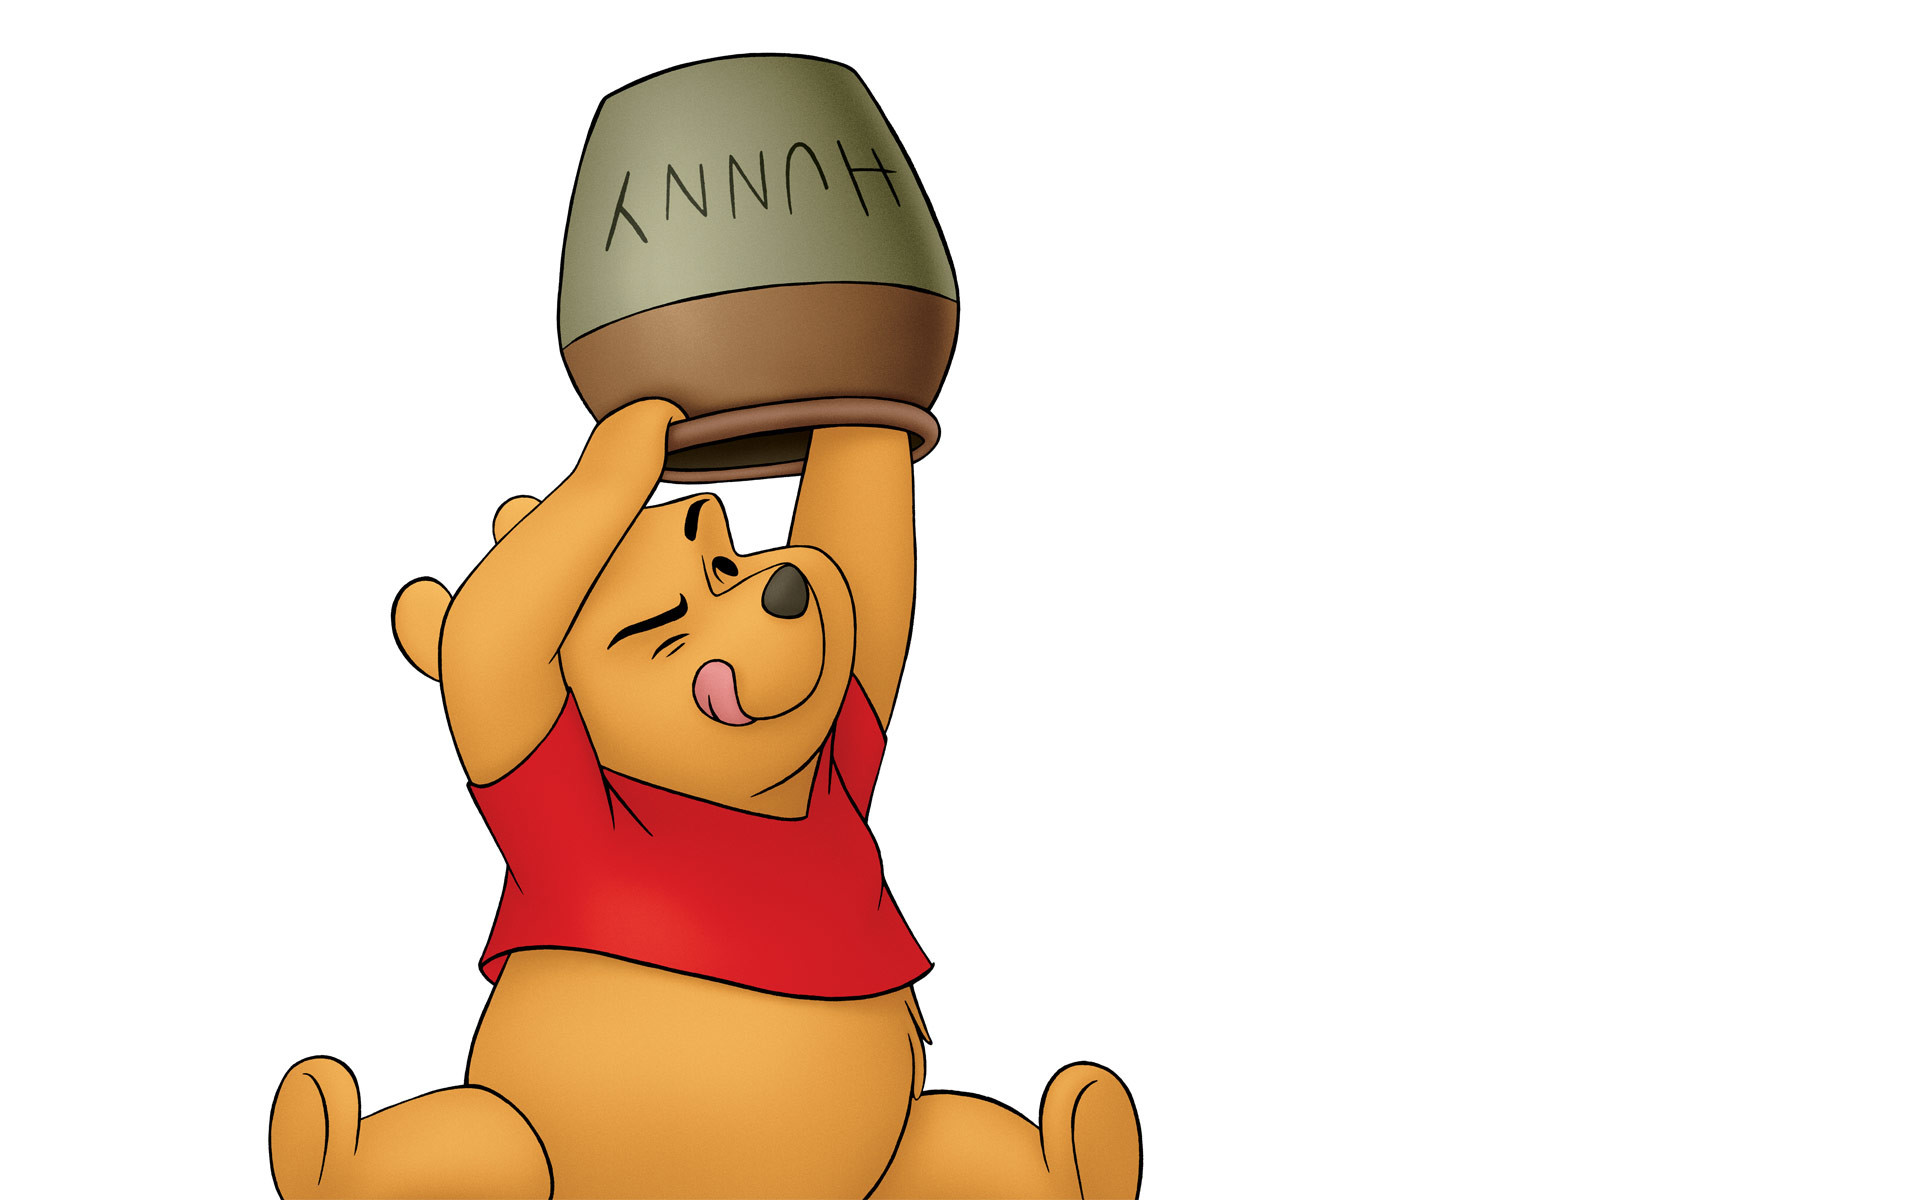 1920x1200 Pooh bear and his hunny/honey pot from Winnie the Pooh wallpaper